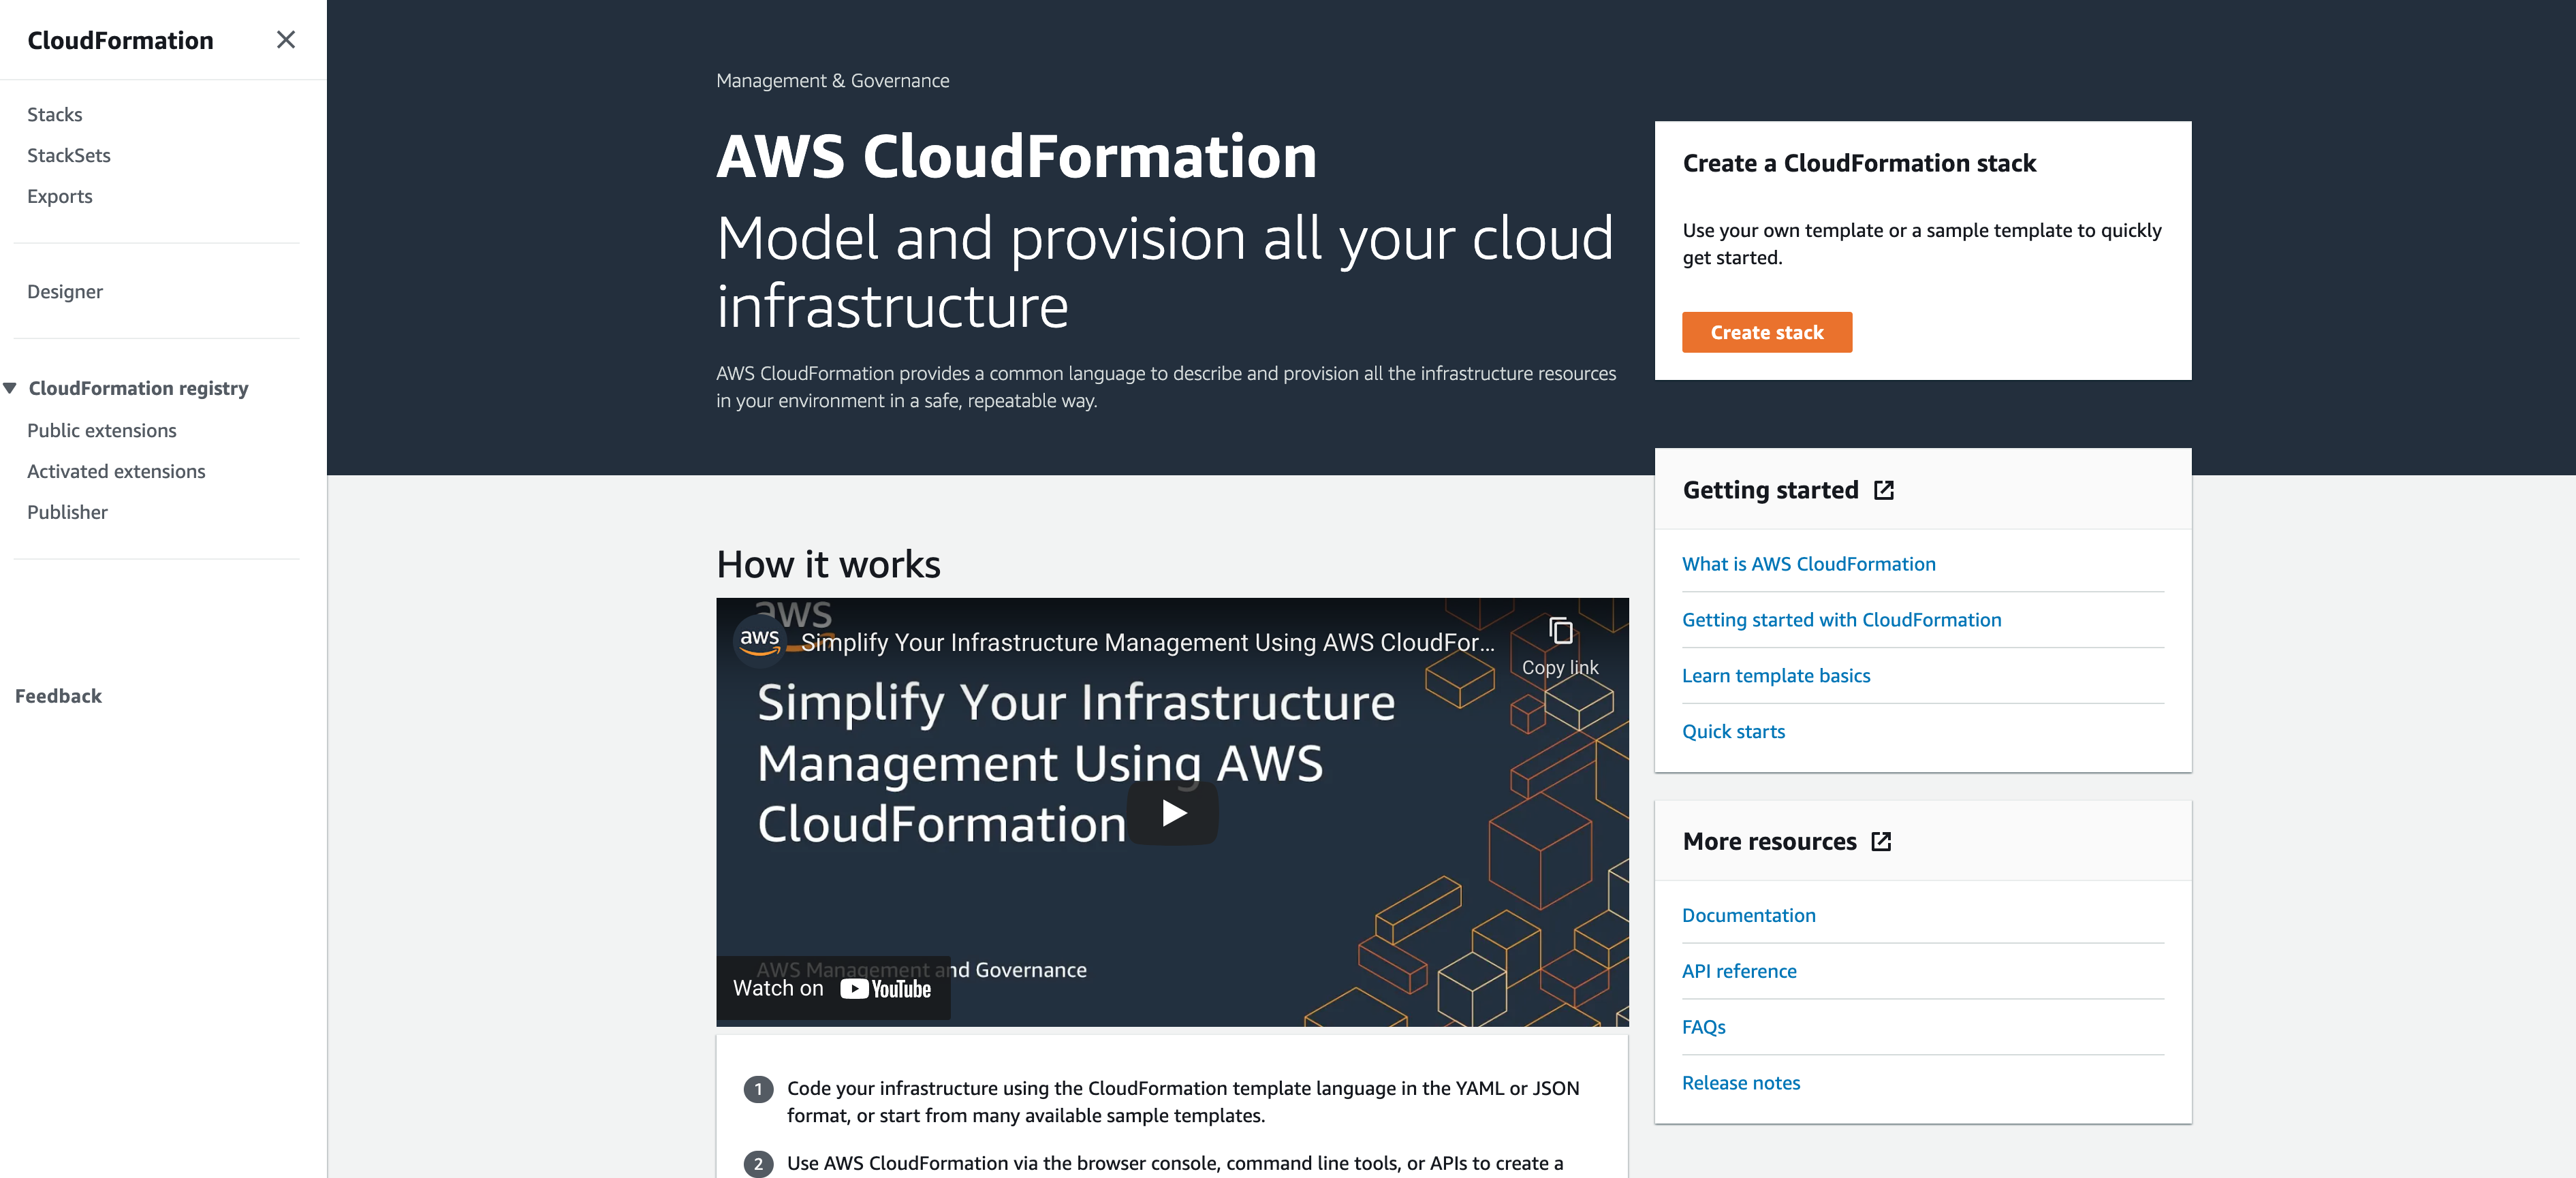 how to access public extensions in AWS CloudFormation 